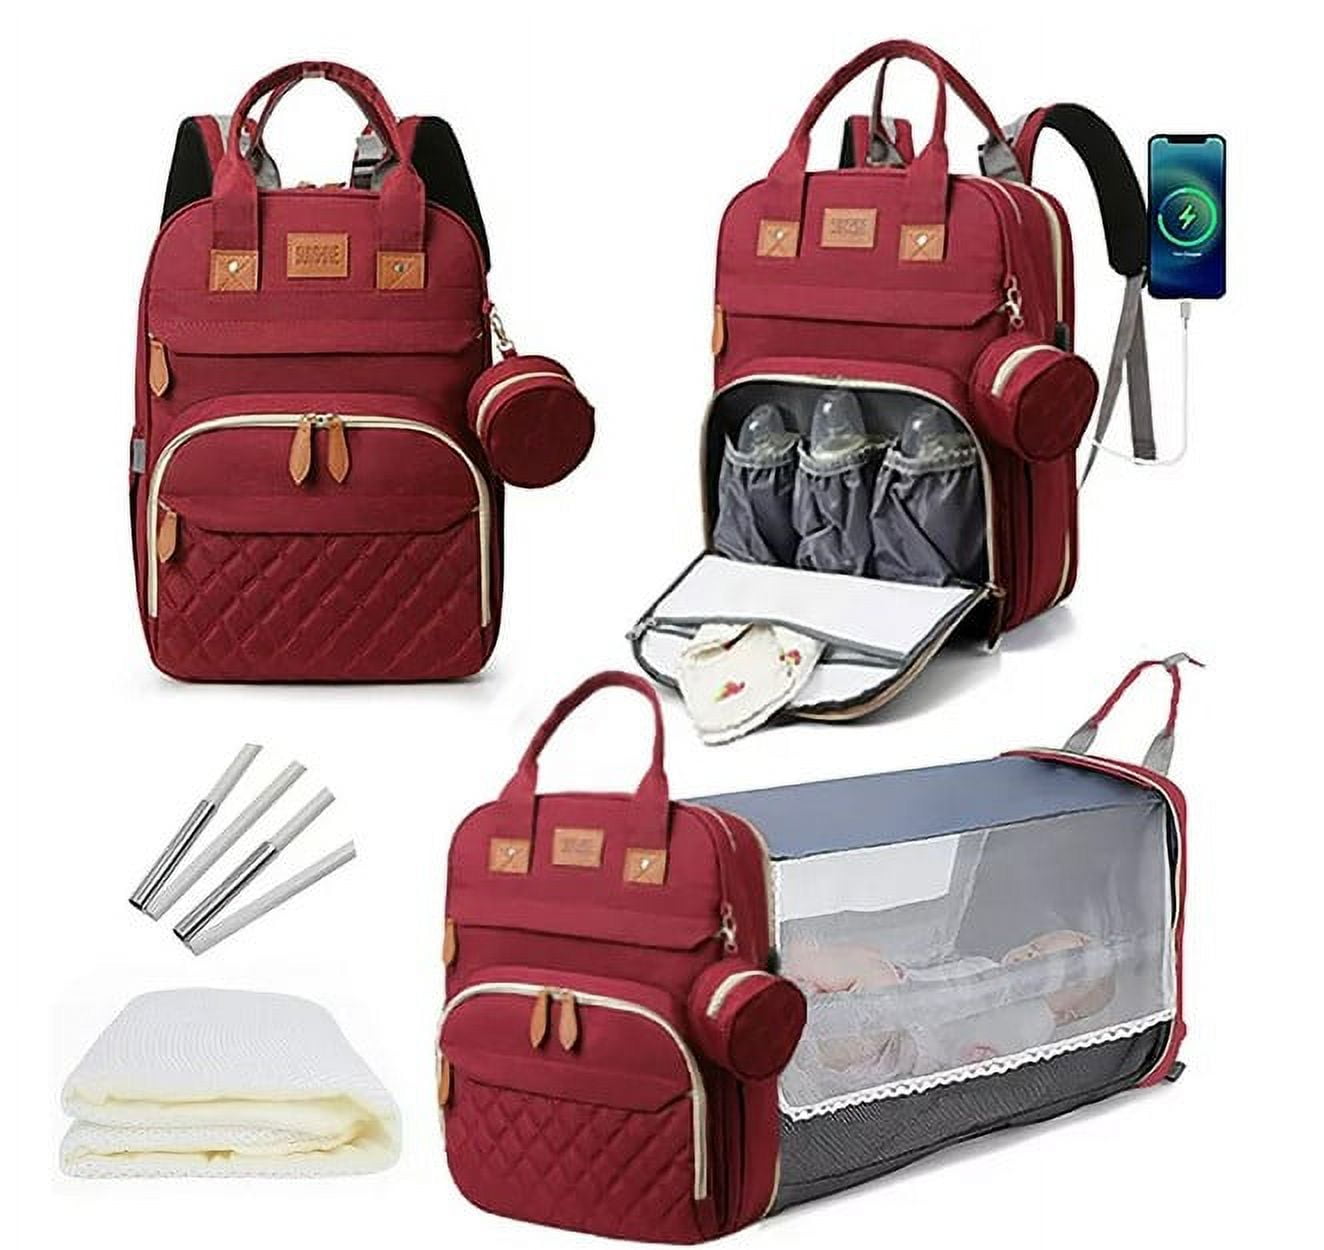 Dokoclub Diaper Bag, Baby bags Backpack for Mom and Dad with India | Ubuy